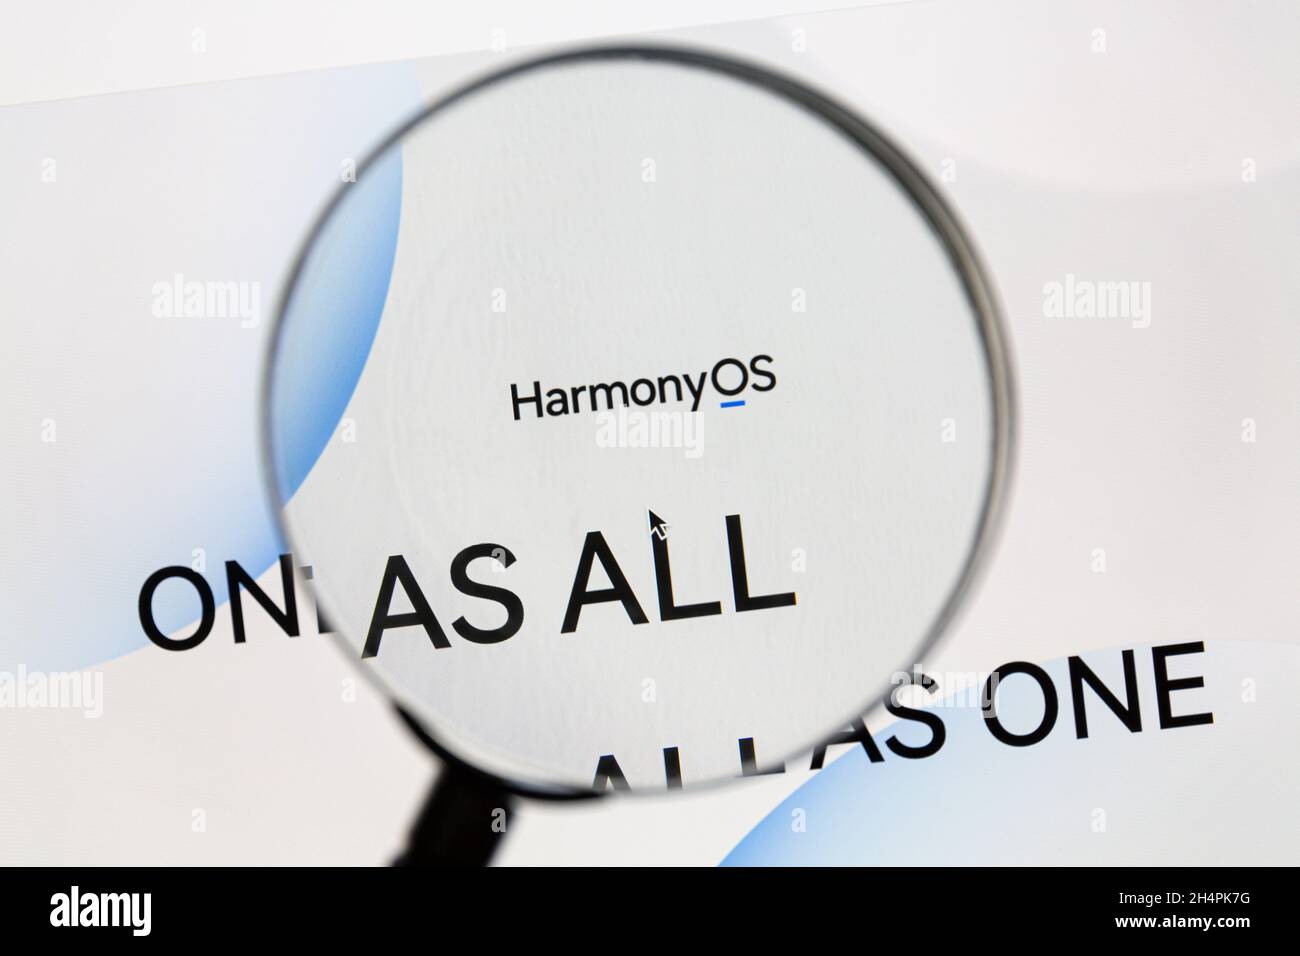 Ostersund, Sweden - June 19, 2021: Harmony OS website. Harmony OS is a operating system developed by Huawei to run on multiple devices. Stock Photo